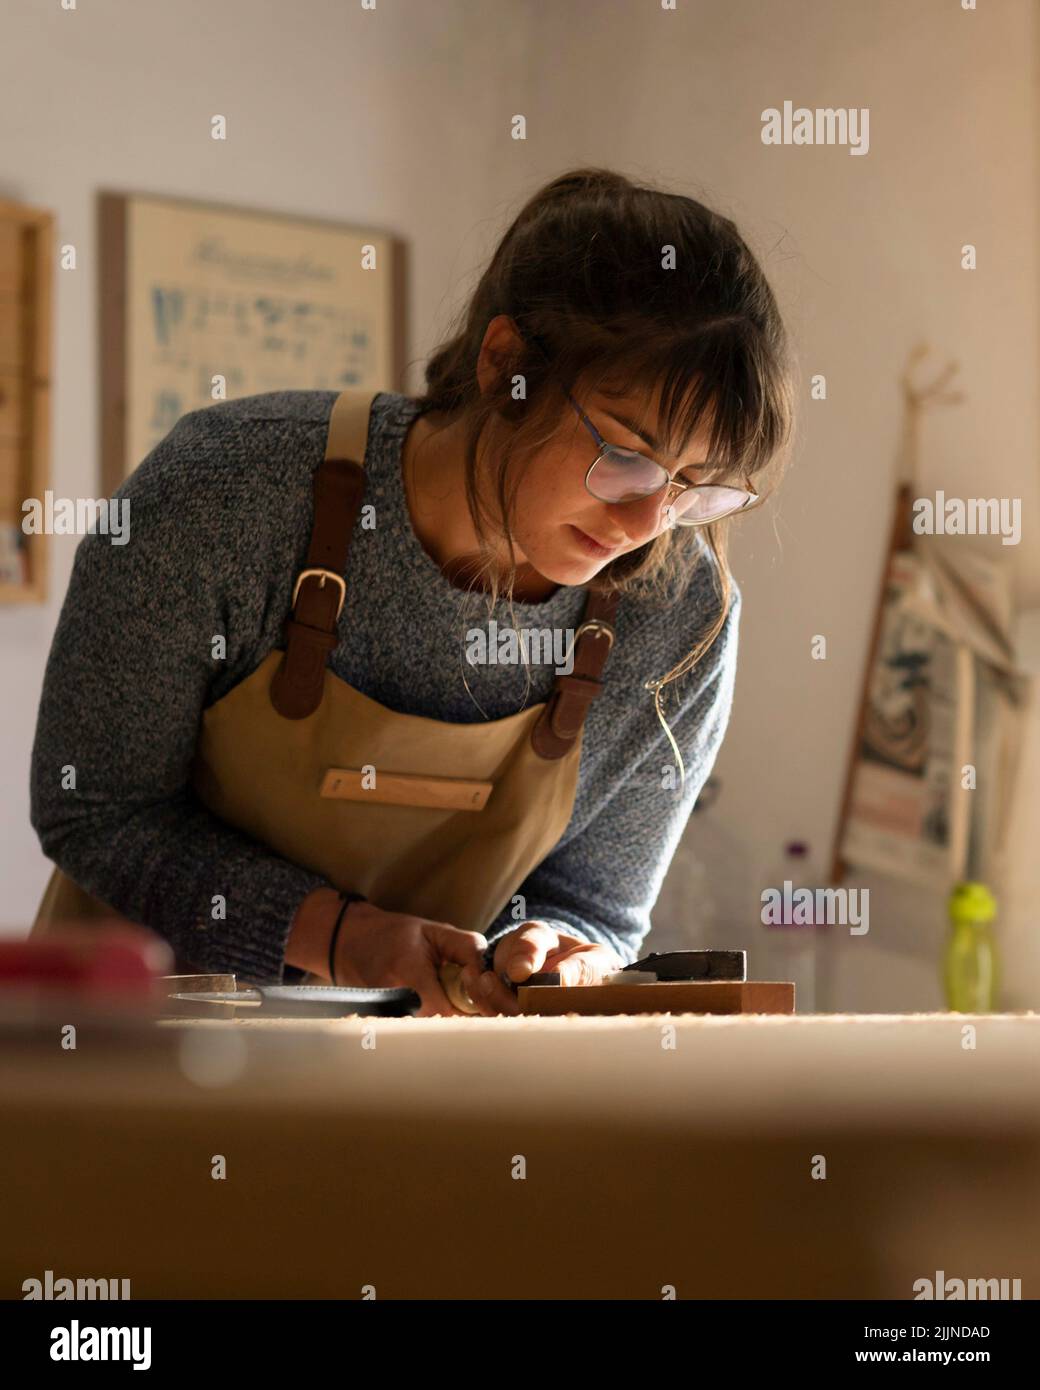 A young girl designing a new home furniture piece crafting out of timber Stock Photo